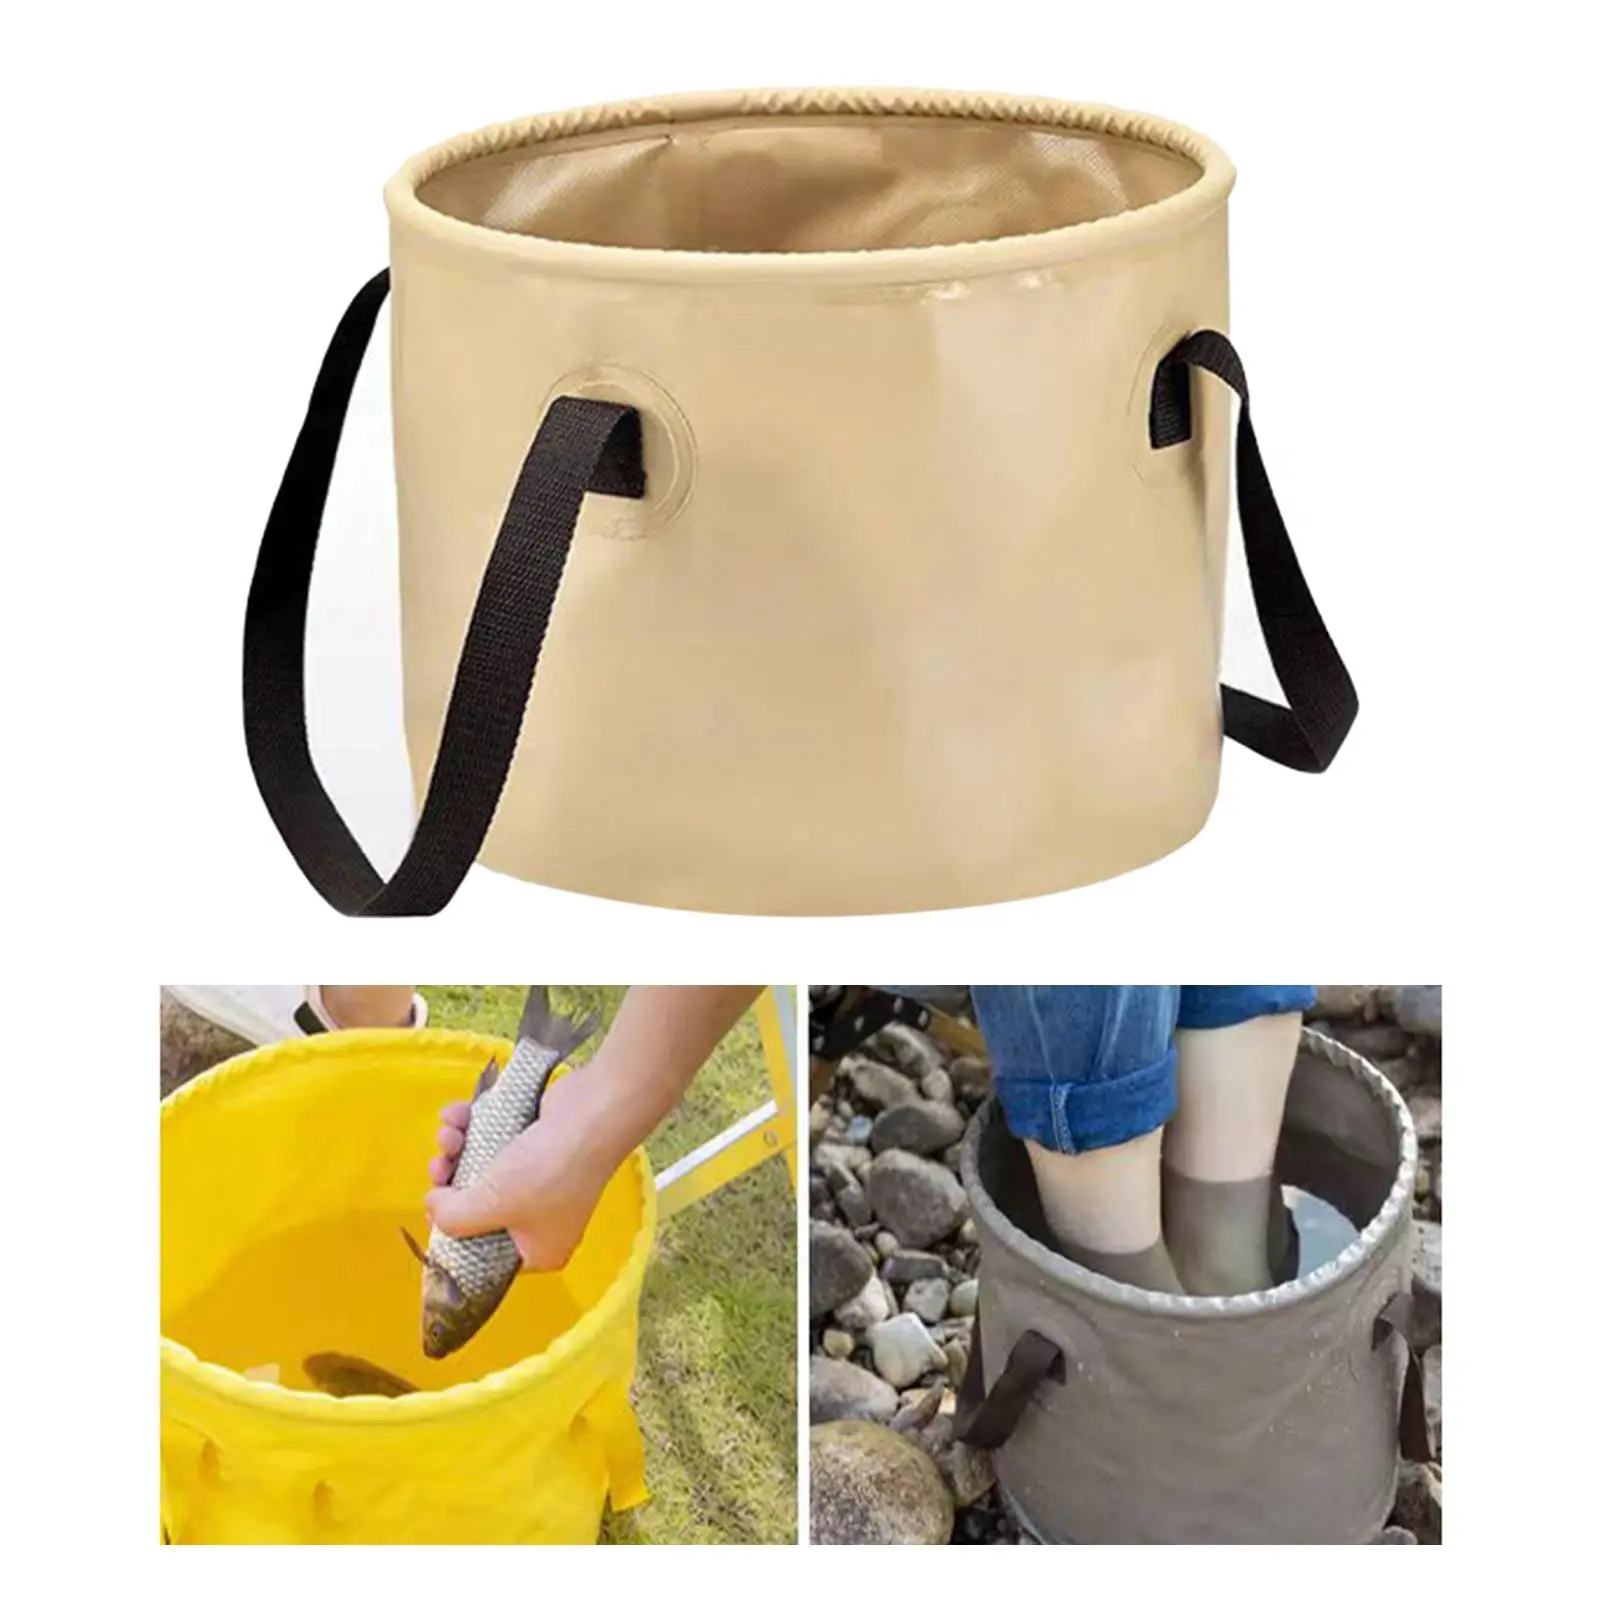 Multifunctional Camping Storage Bucket Foldable Fruit Picking Basket Wash Basin Water Container for Fishing Camping Accessories